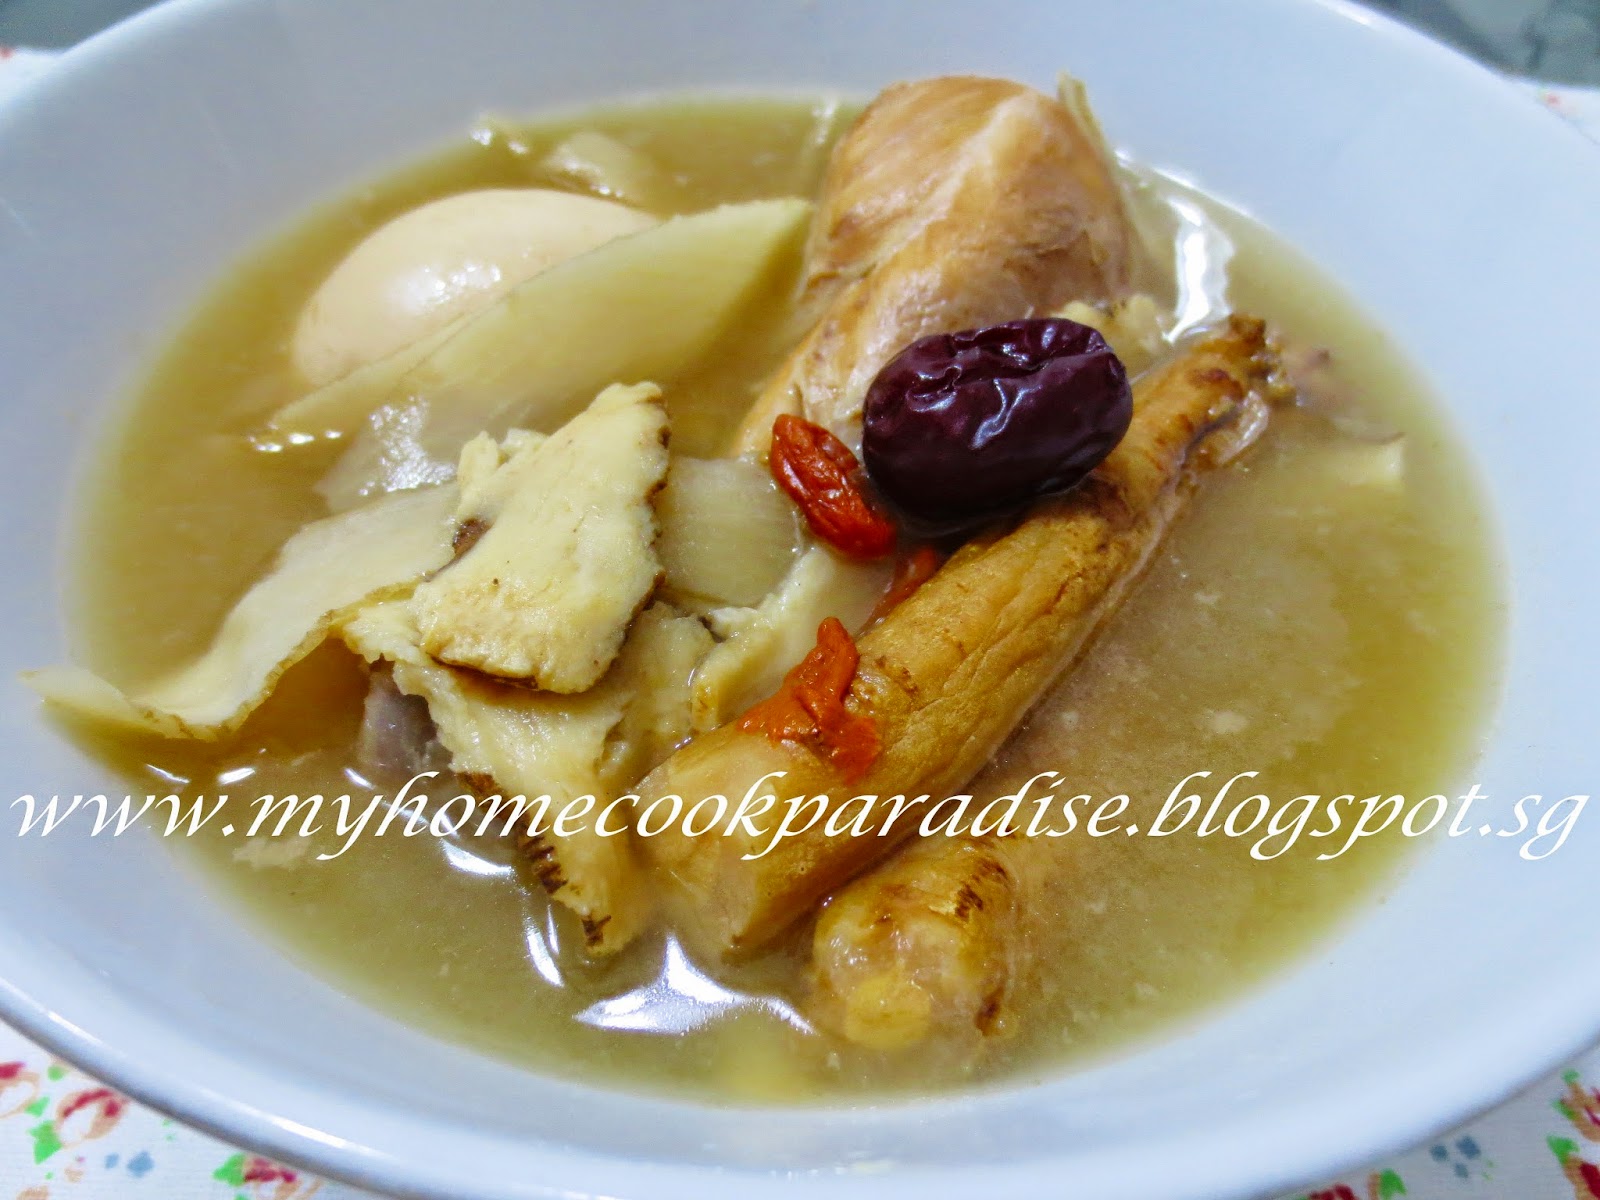 http://myhomecookparadise.blogspot.sg/2014/06/herbal-chicken-soup-01-may-14.html